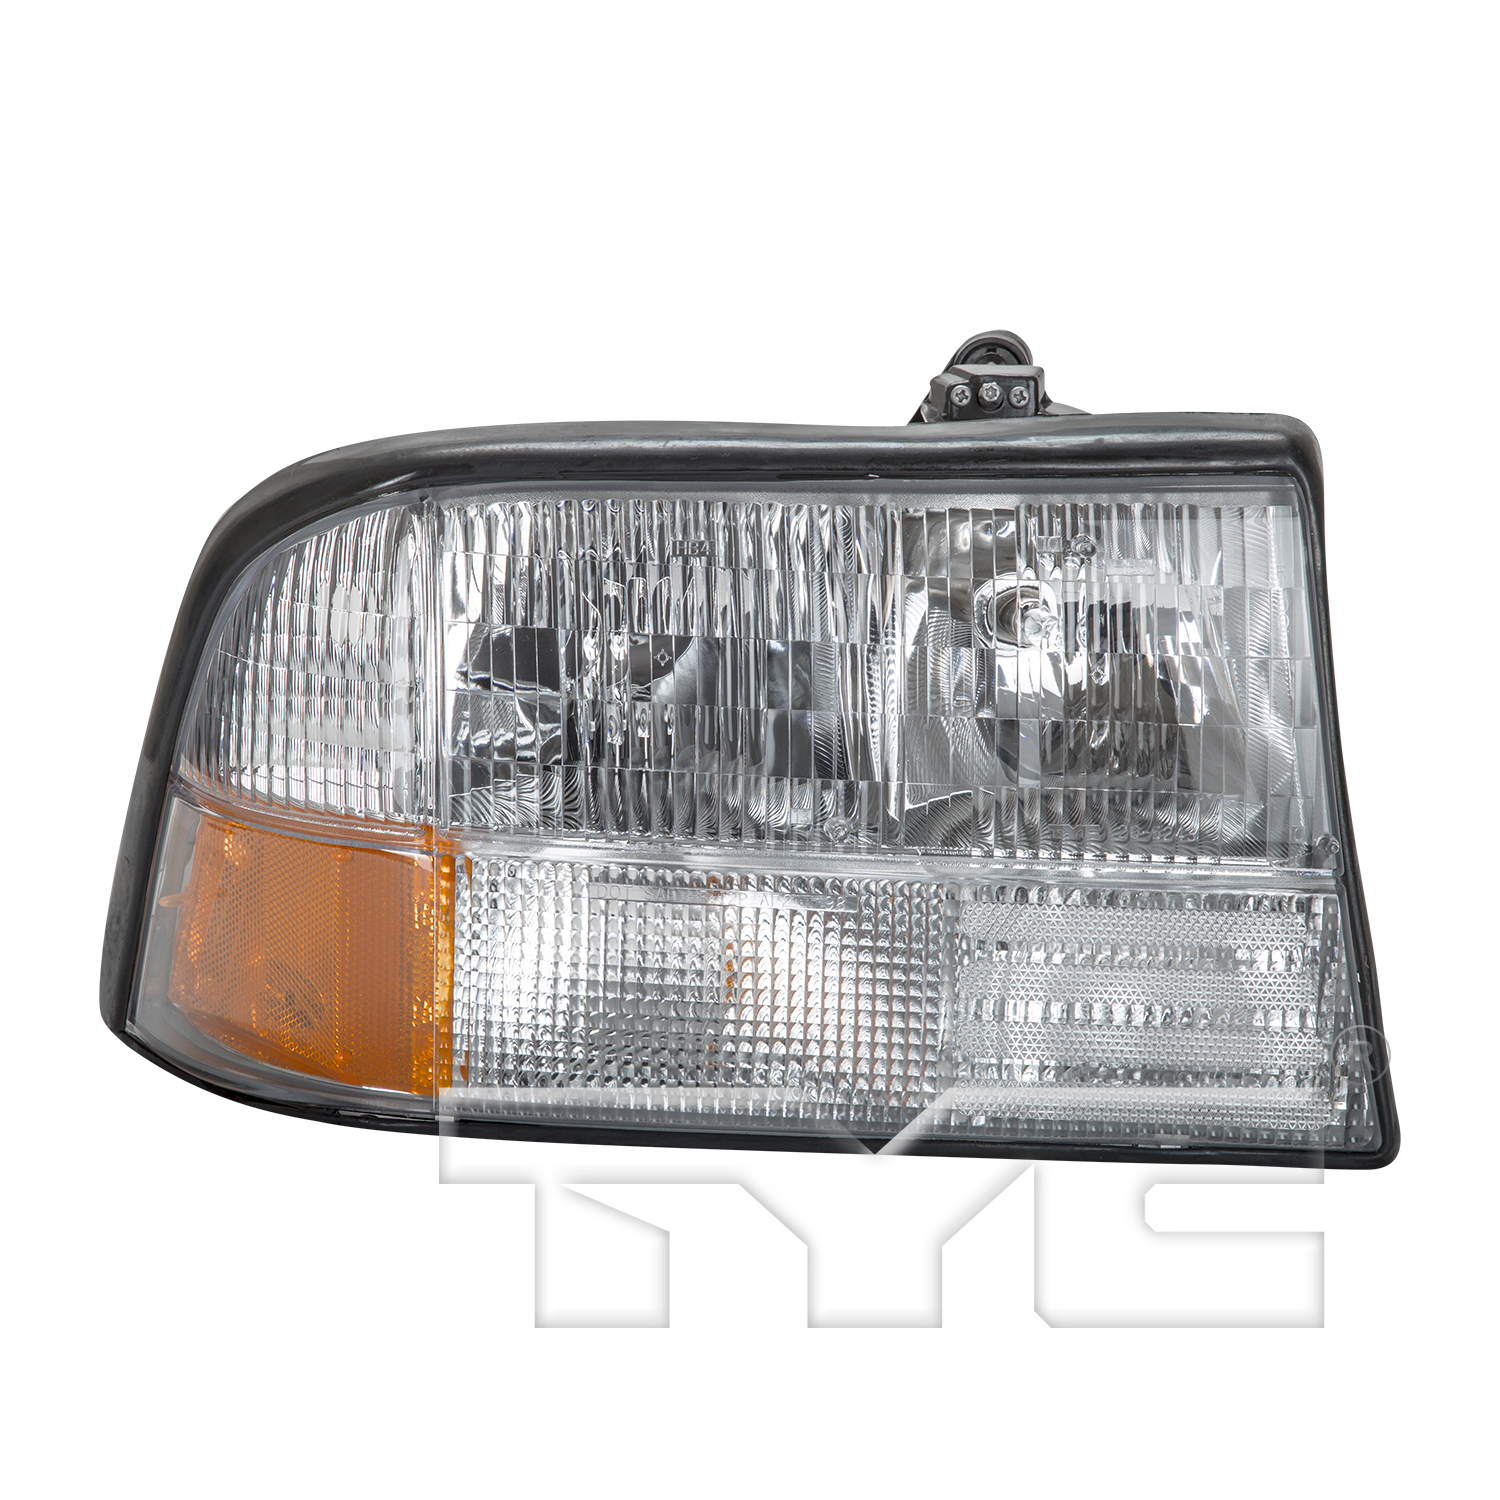 Aftermarket HEADLIGHTS for GMC - SONOMA, SONOMA,98-04,RT Headlamp assy composite